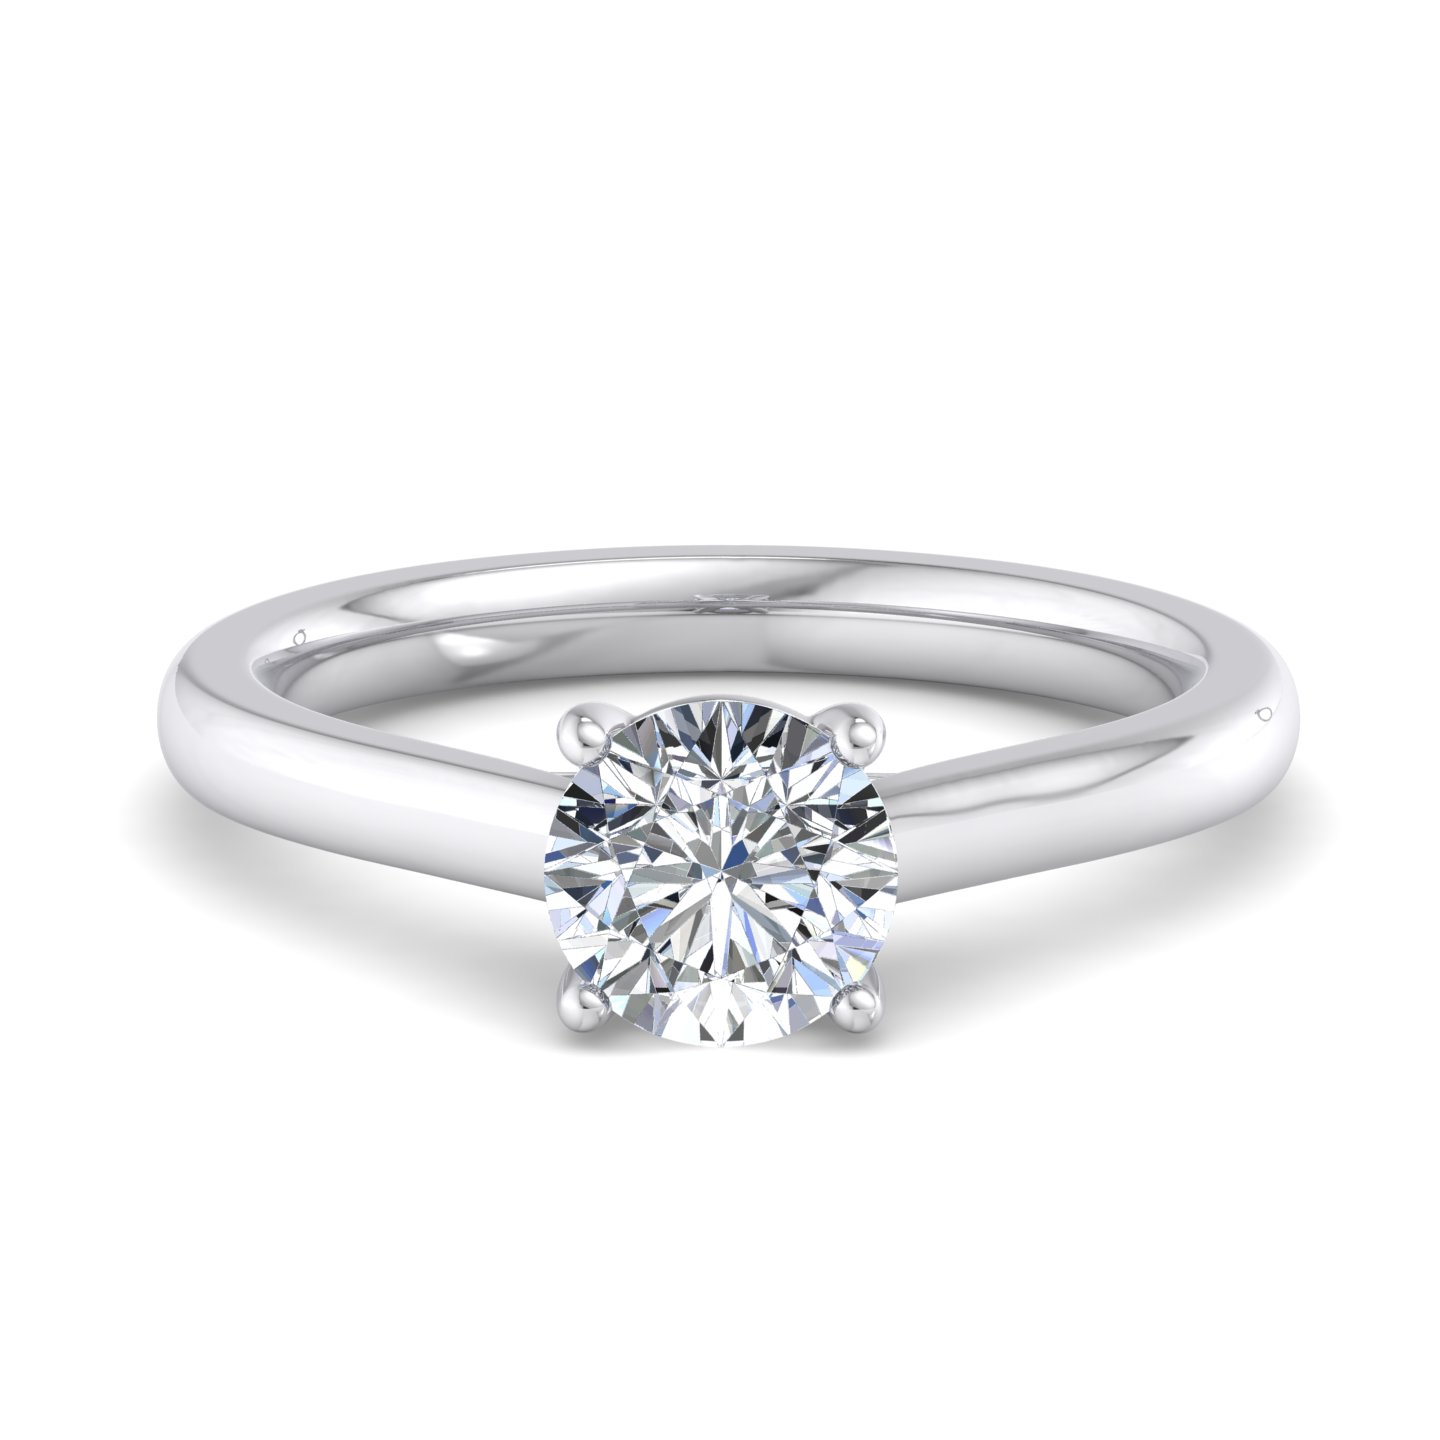 Summer Solitaire engagement ring